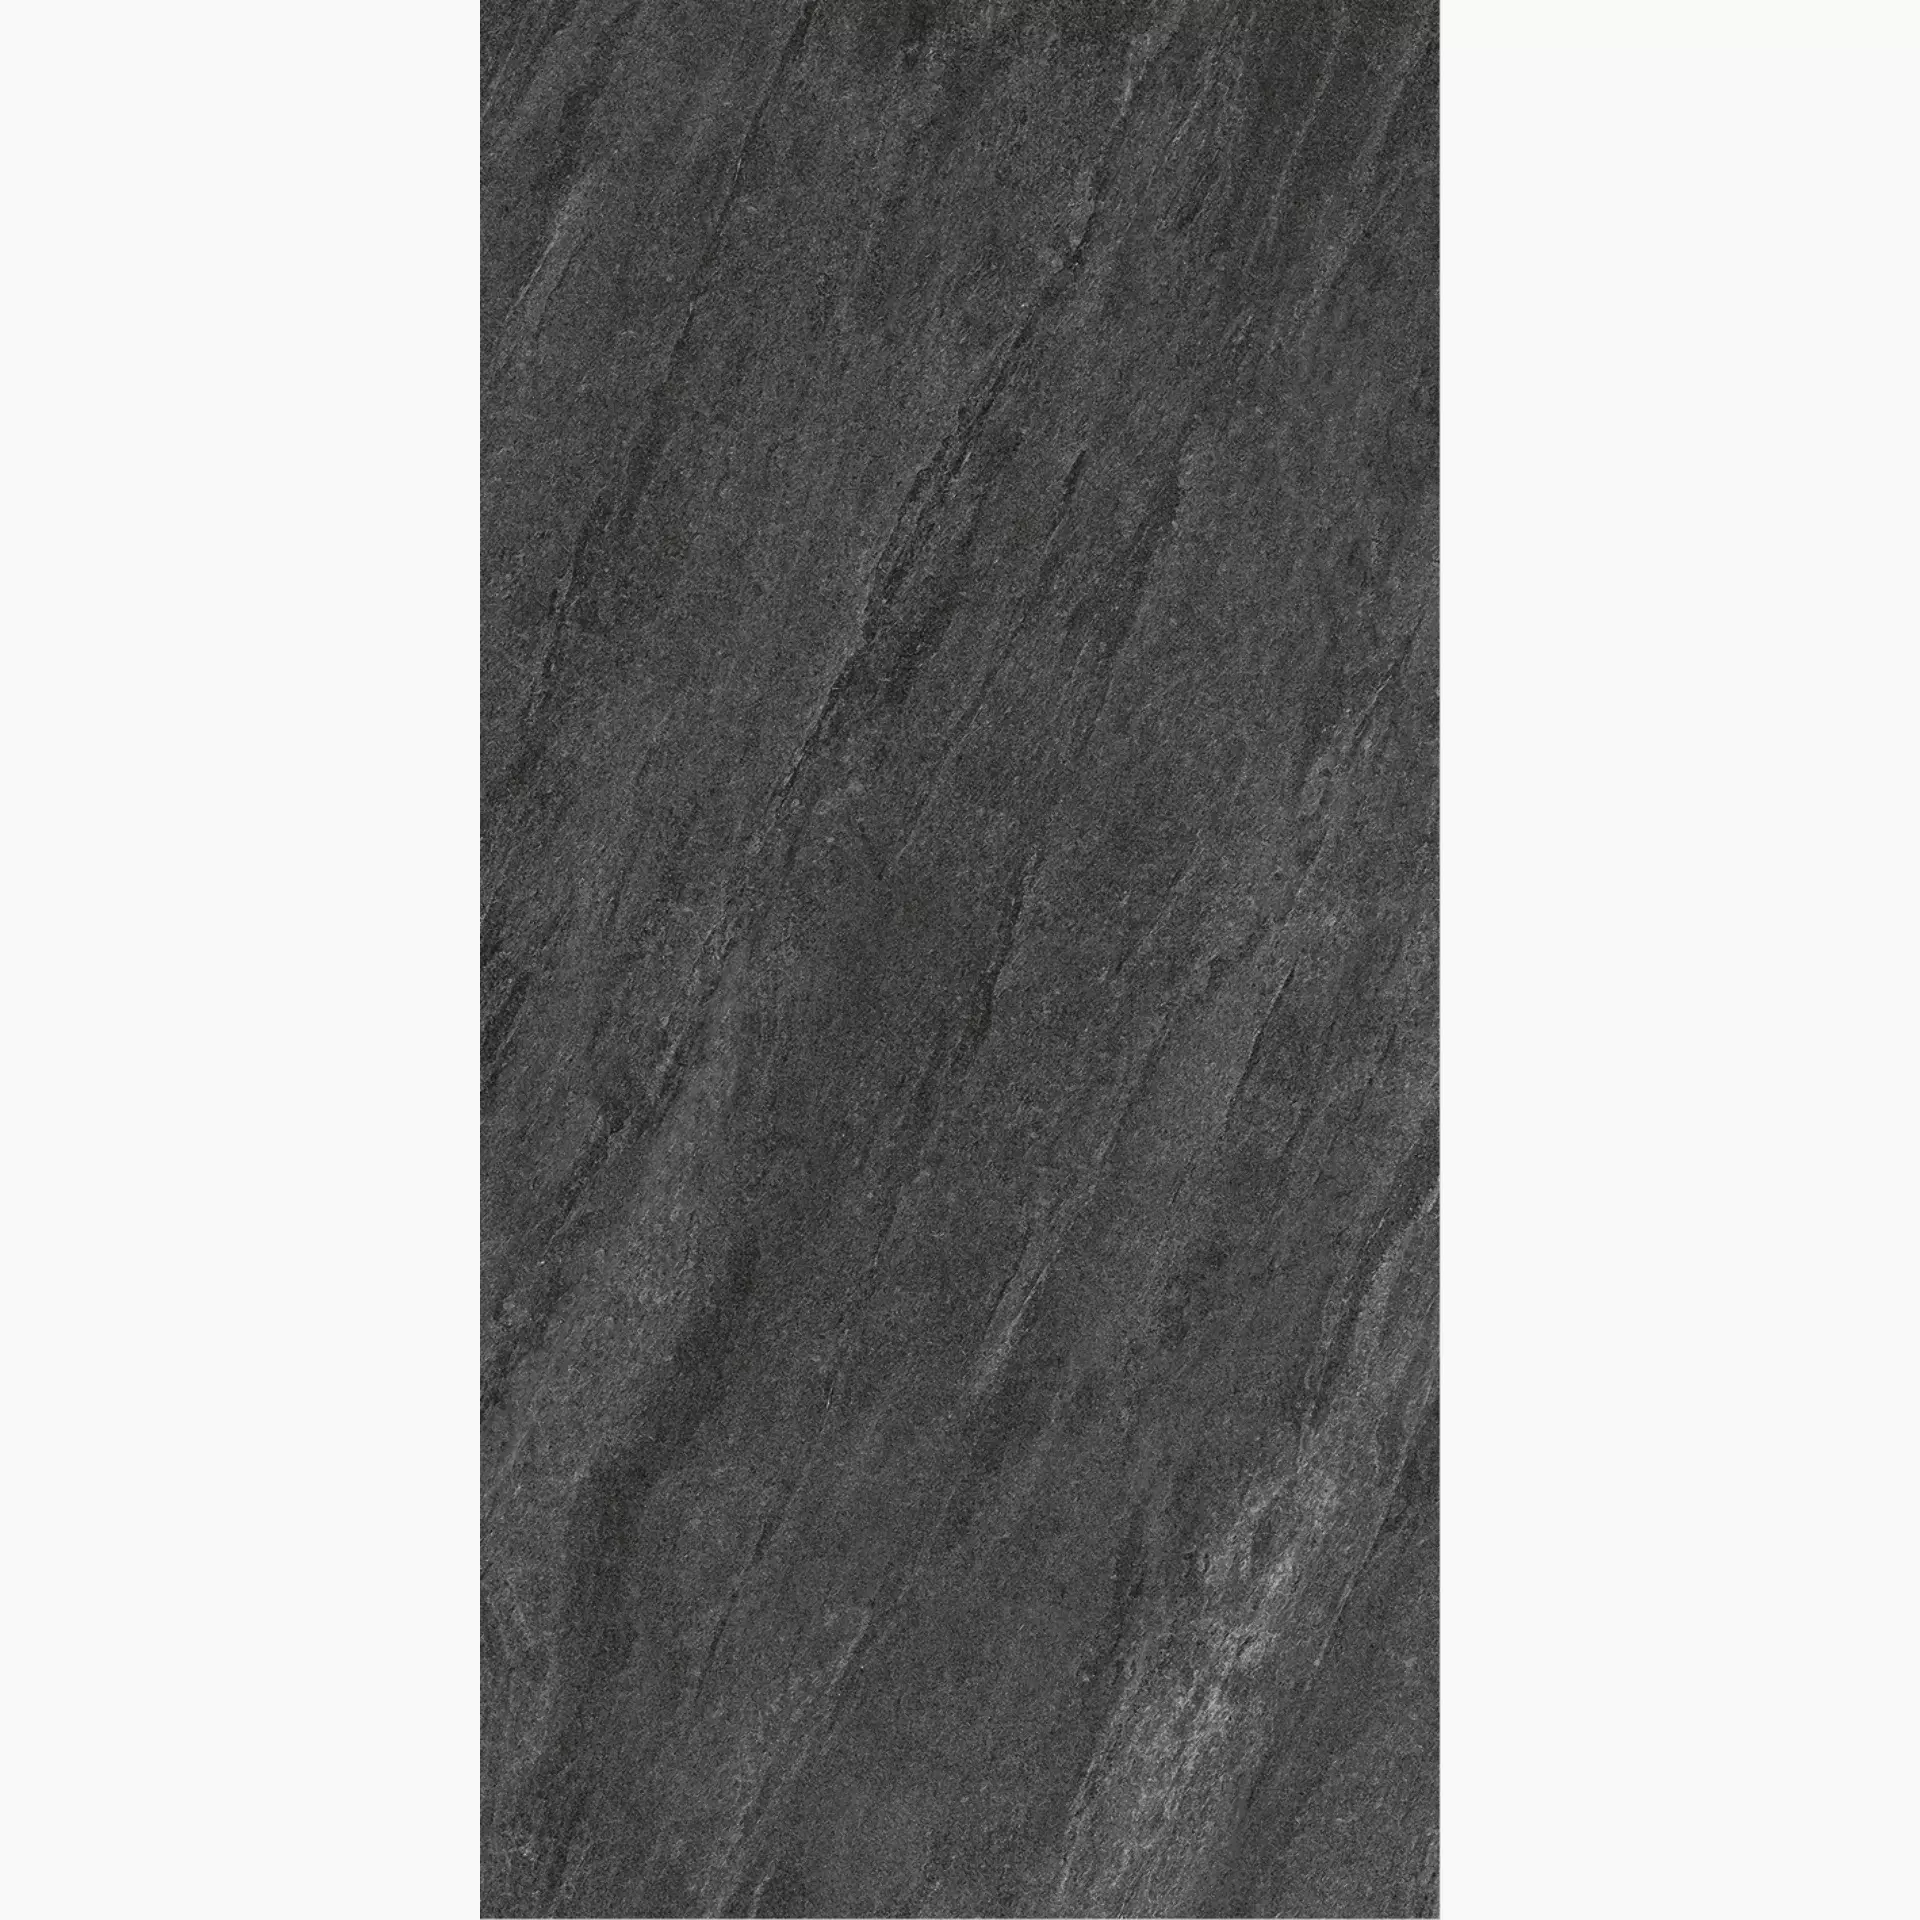 Novabell All Black Nero Naturale ALK92RT 60x120cm rectified 9mm